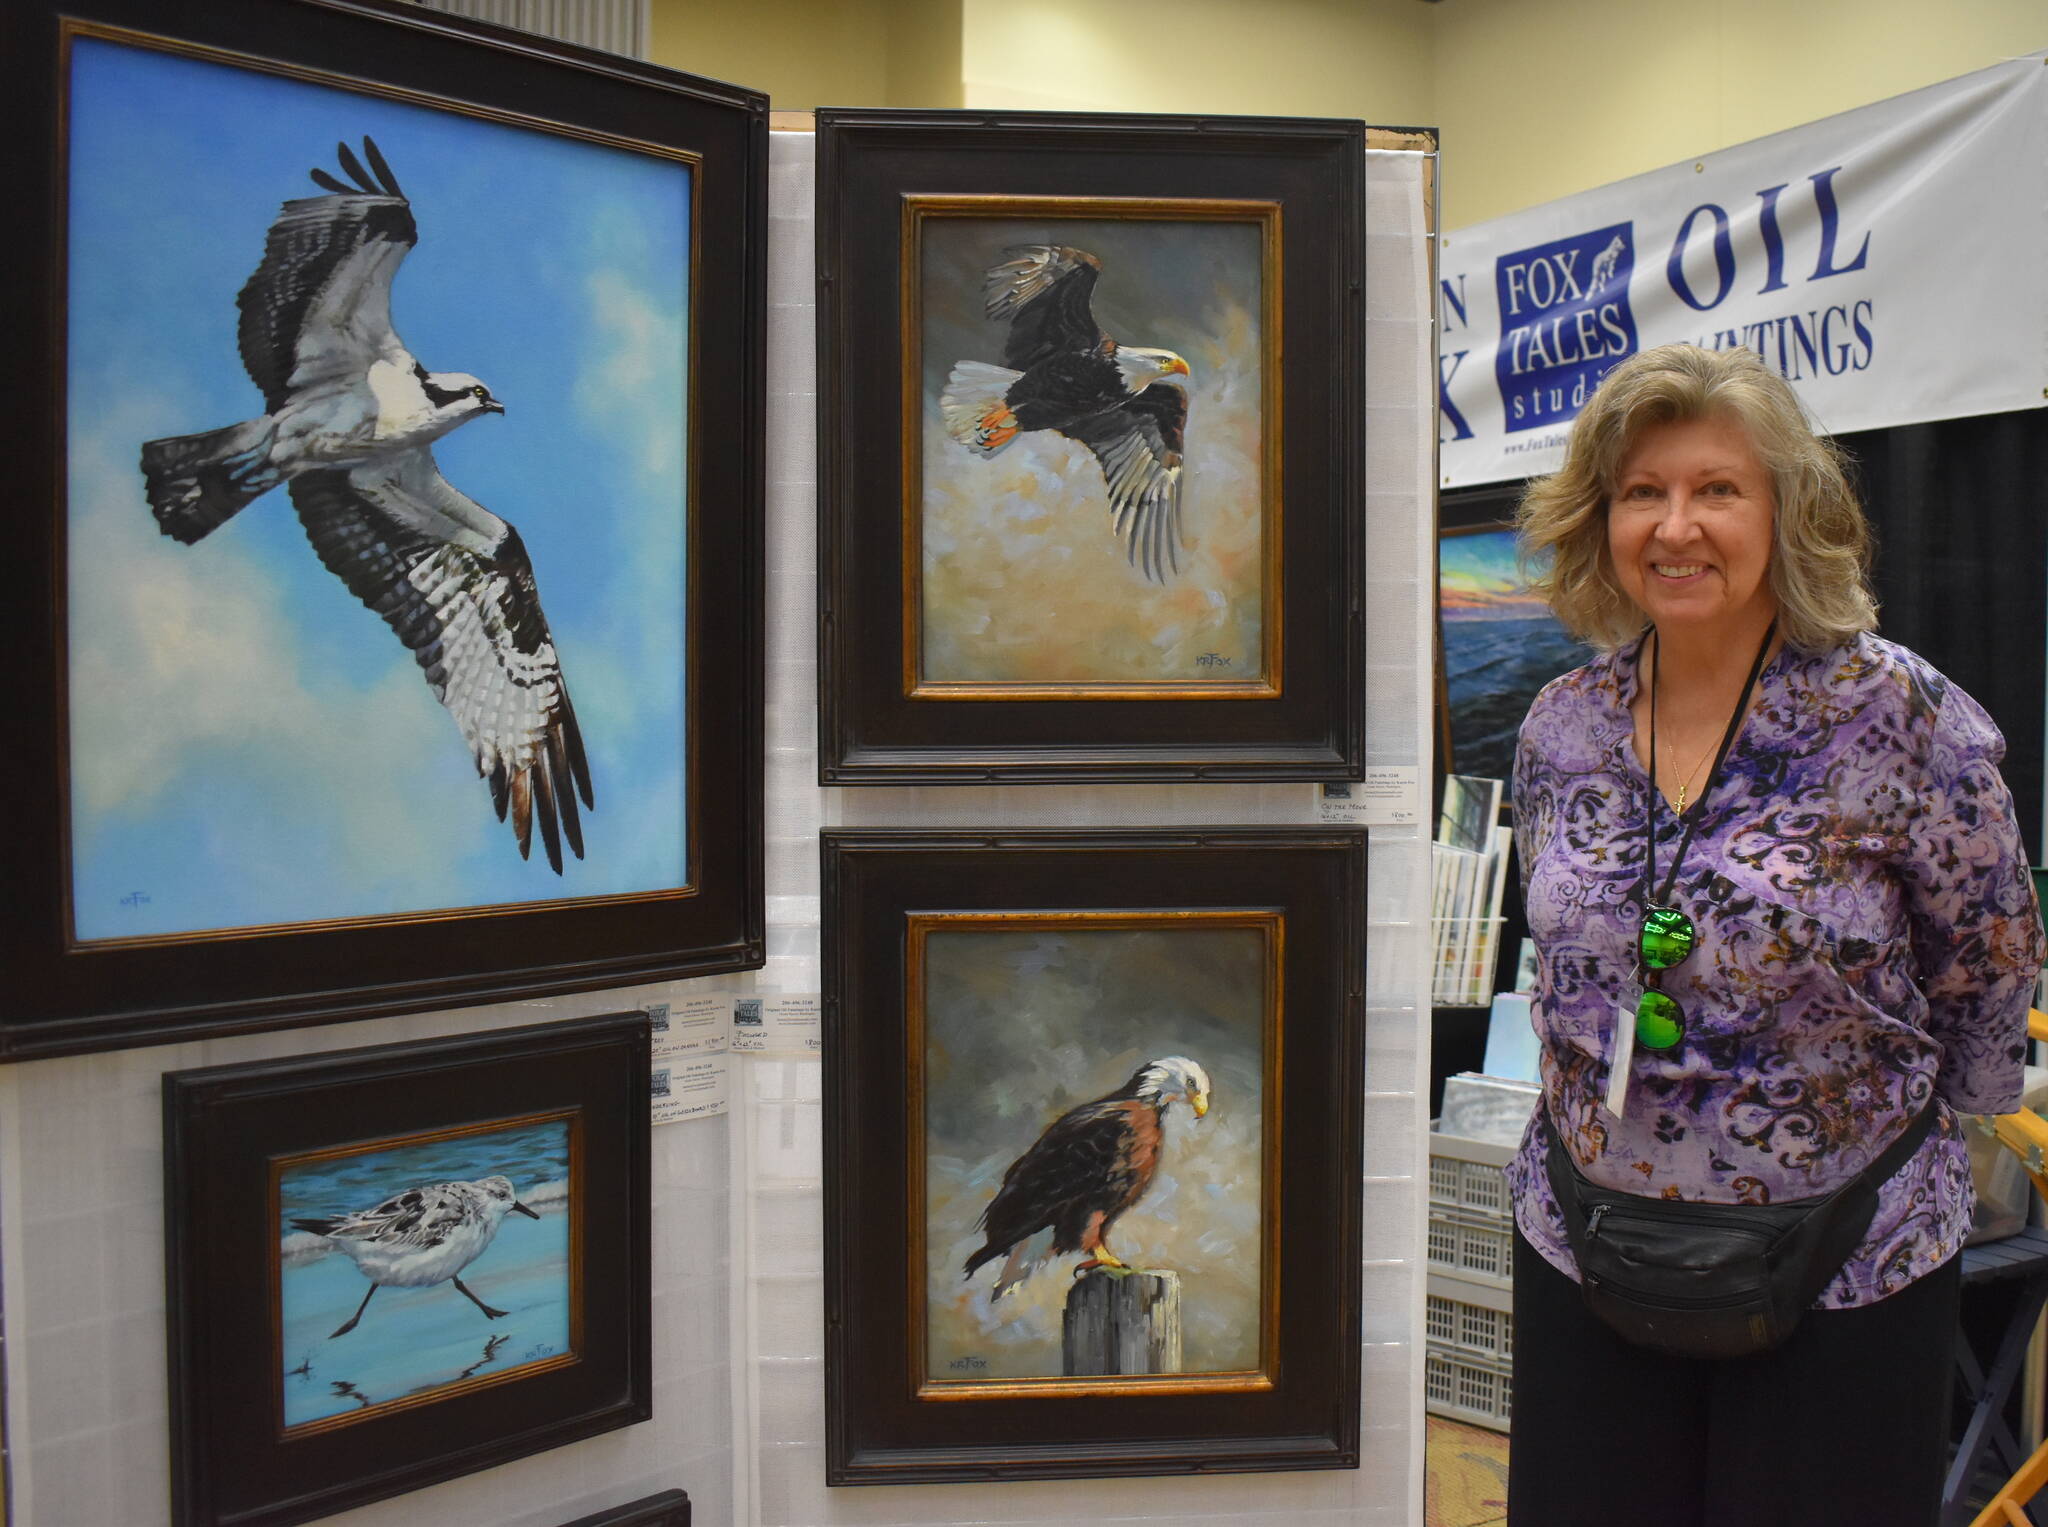 Matthew N. Wells / The Daily World
Karen Fox, who paints animals and vivid nature scenes, stands proudly by a few of her work this past weekend at the 54th annual Associated Arts Ocean Shores Arts & Crafts Festival. Fox has been painting since 1997, but much of her work accelerated during the COVID-19 pandemic. More of her work can be found by searching online for “Fox Tales Studio.”